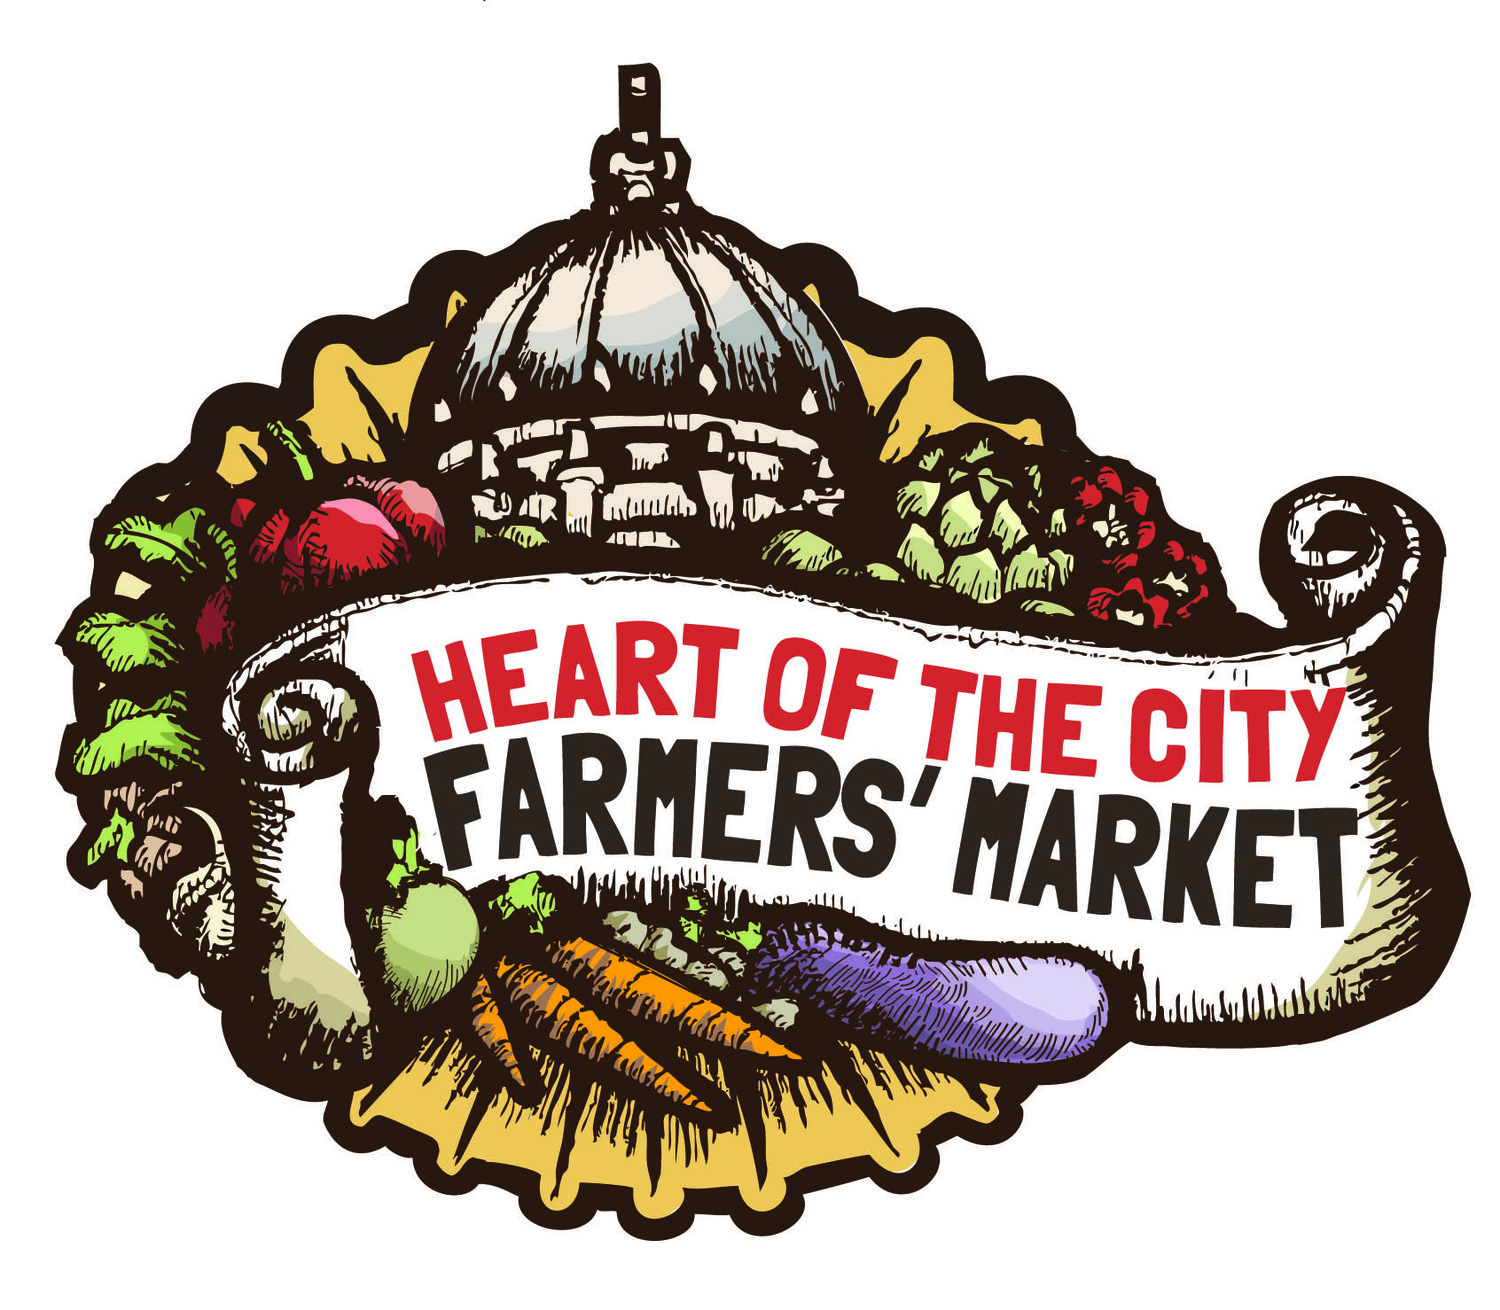 The Heart of the City Farmers Market